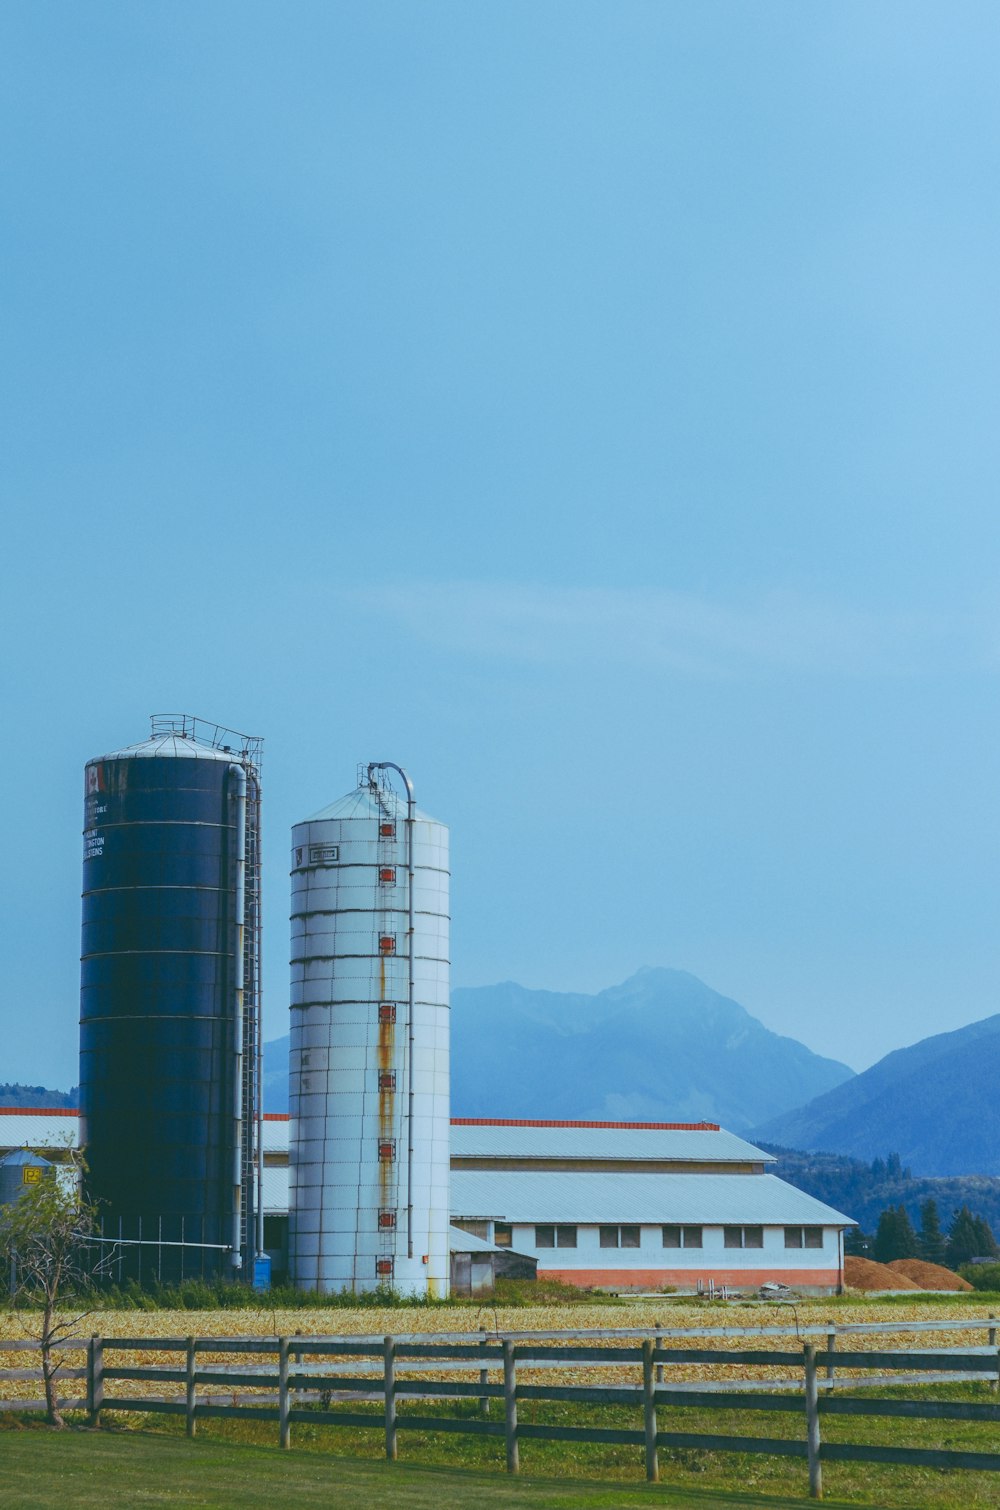 a farm with two silos and a barn in the background